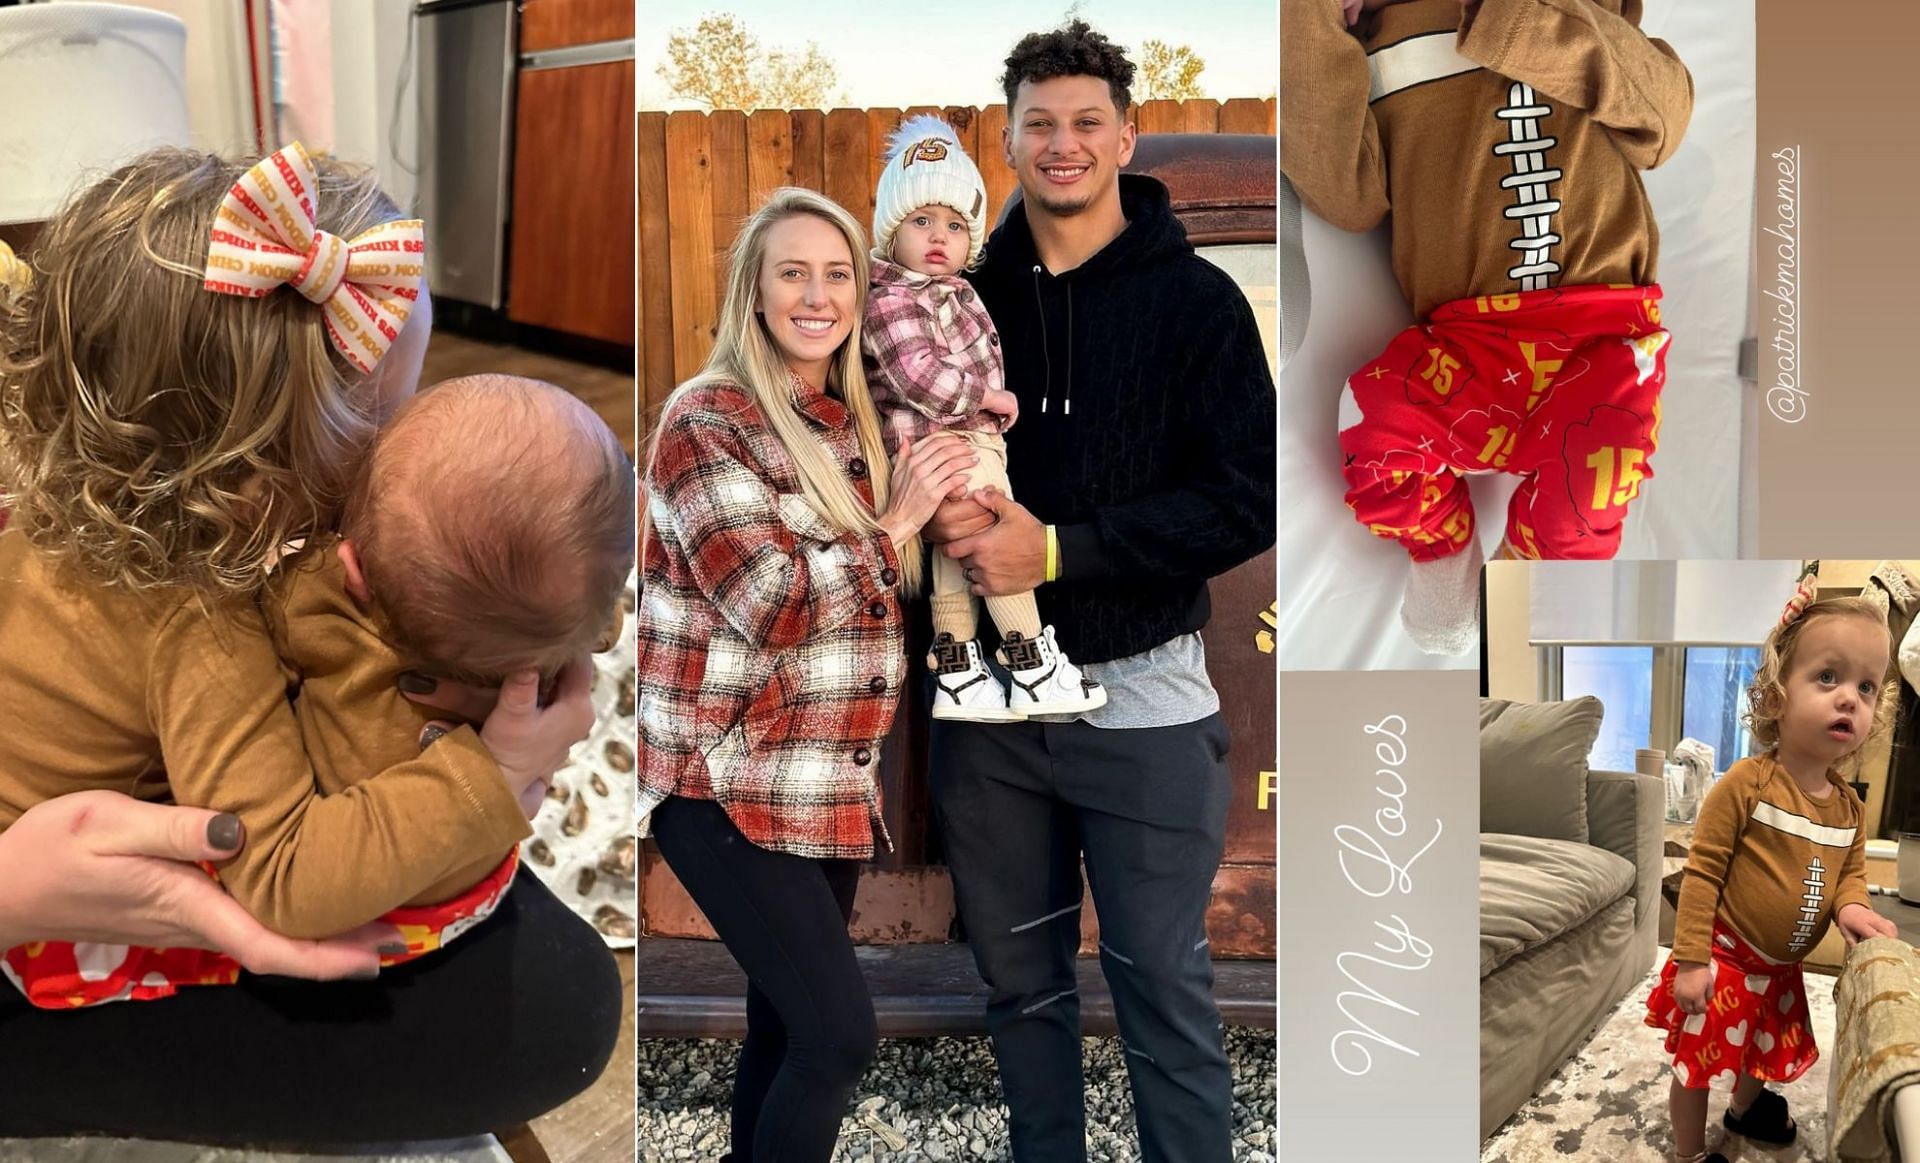 Brittany Mahomes shares son Bronze's excitement for Patrick Mahomes' outing  in the preseason -“Ready for gameday”